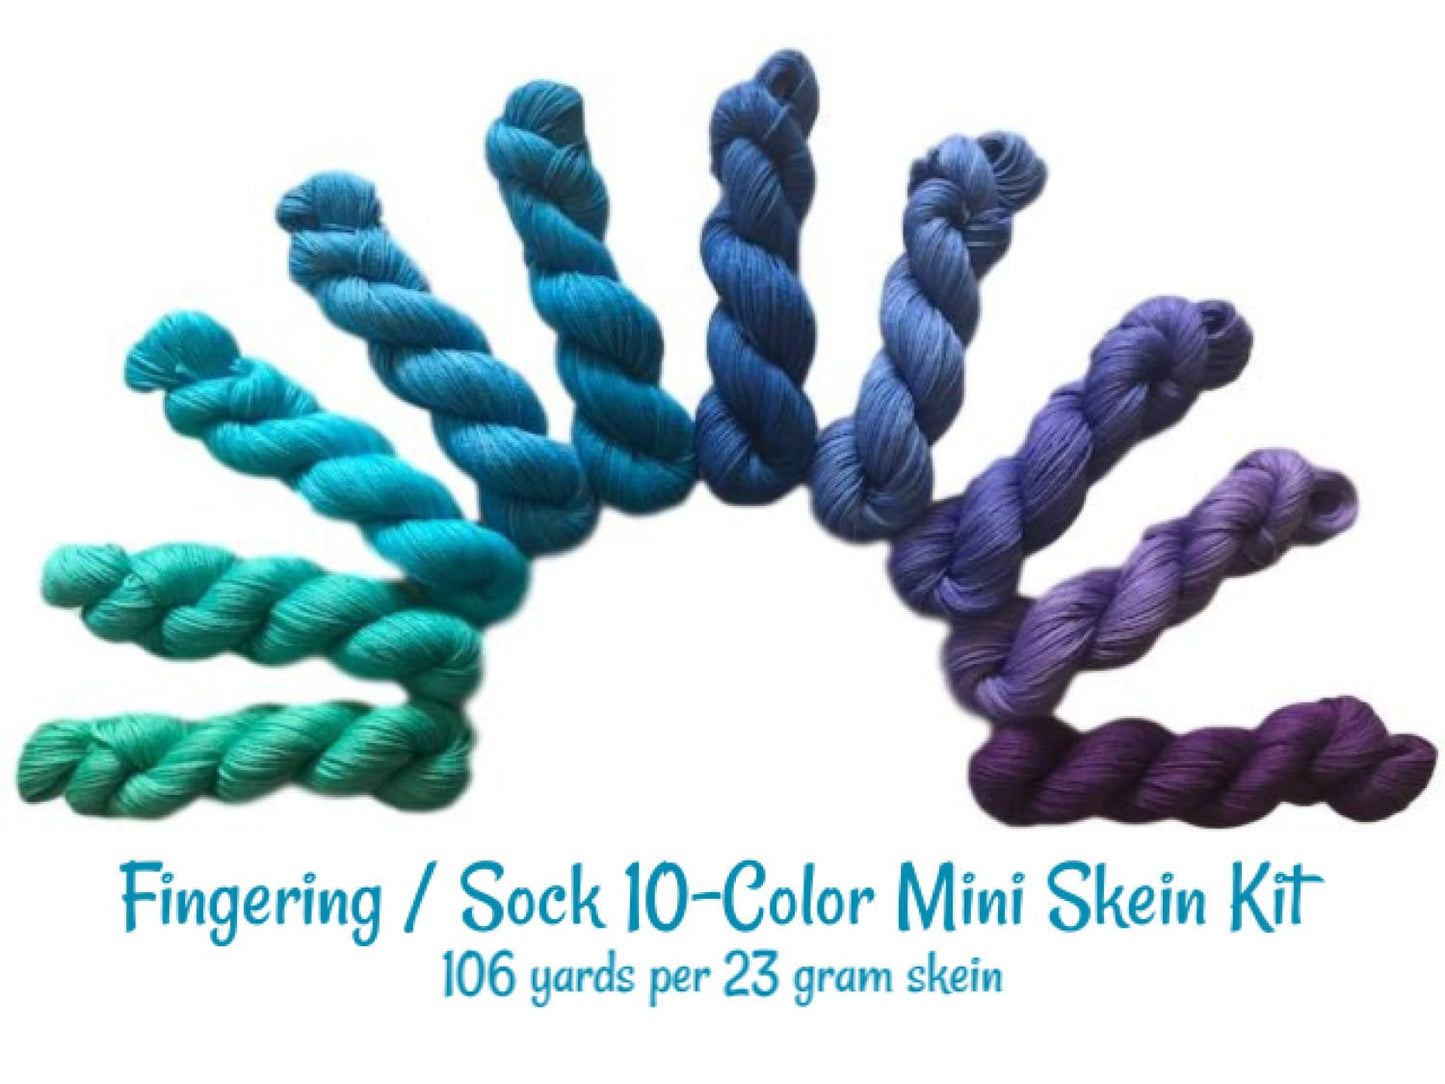 Hand Dyed Vegan Yarn Kit - Fingering / Sock Weight Bamboo Cotton - Teal Blue Purple Gradient - Semi Solid Crochet and Knitting Thread 3 Ply